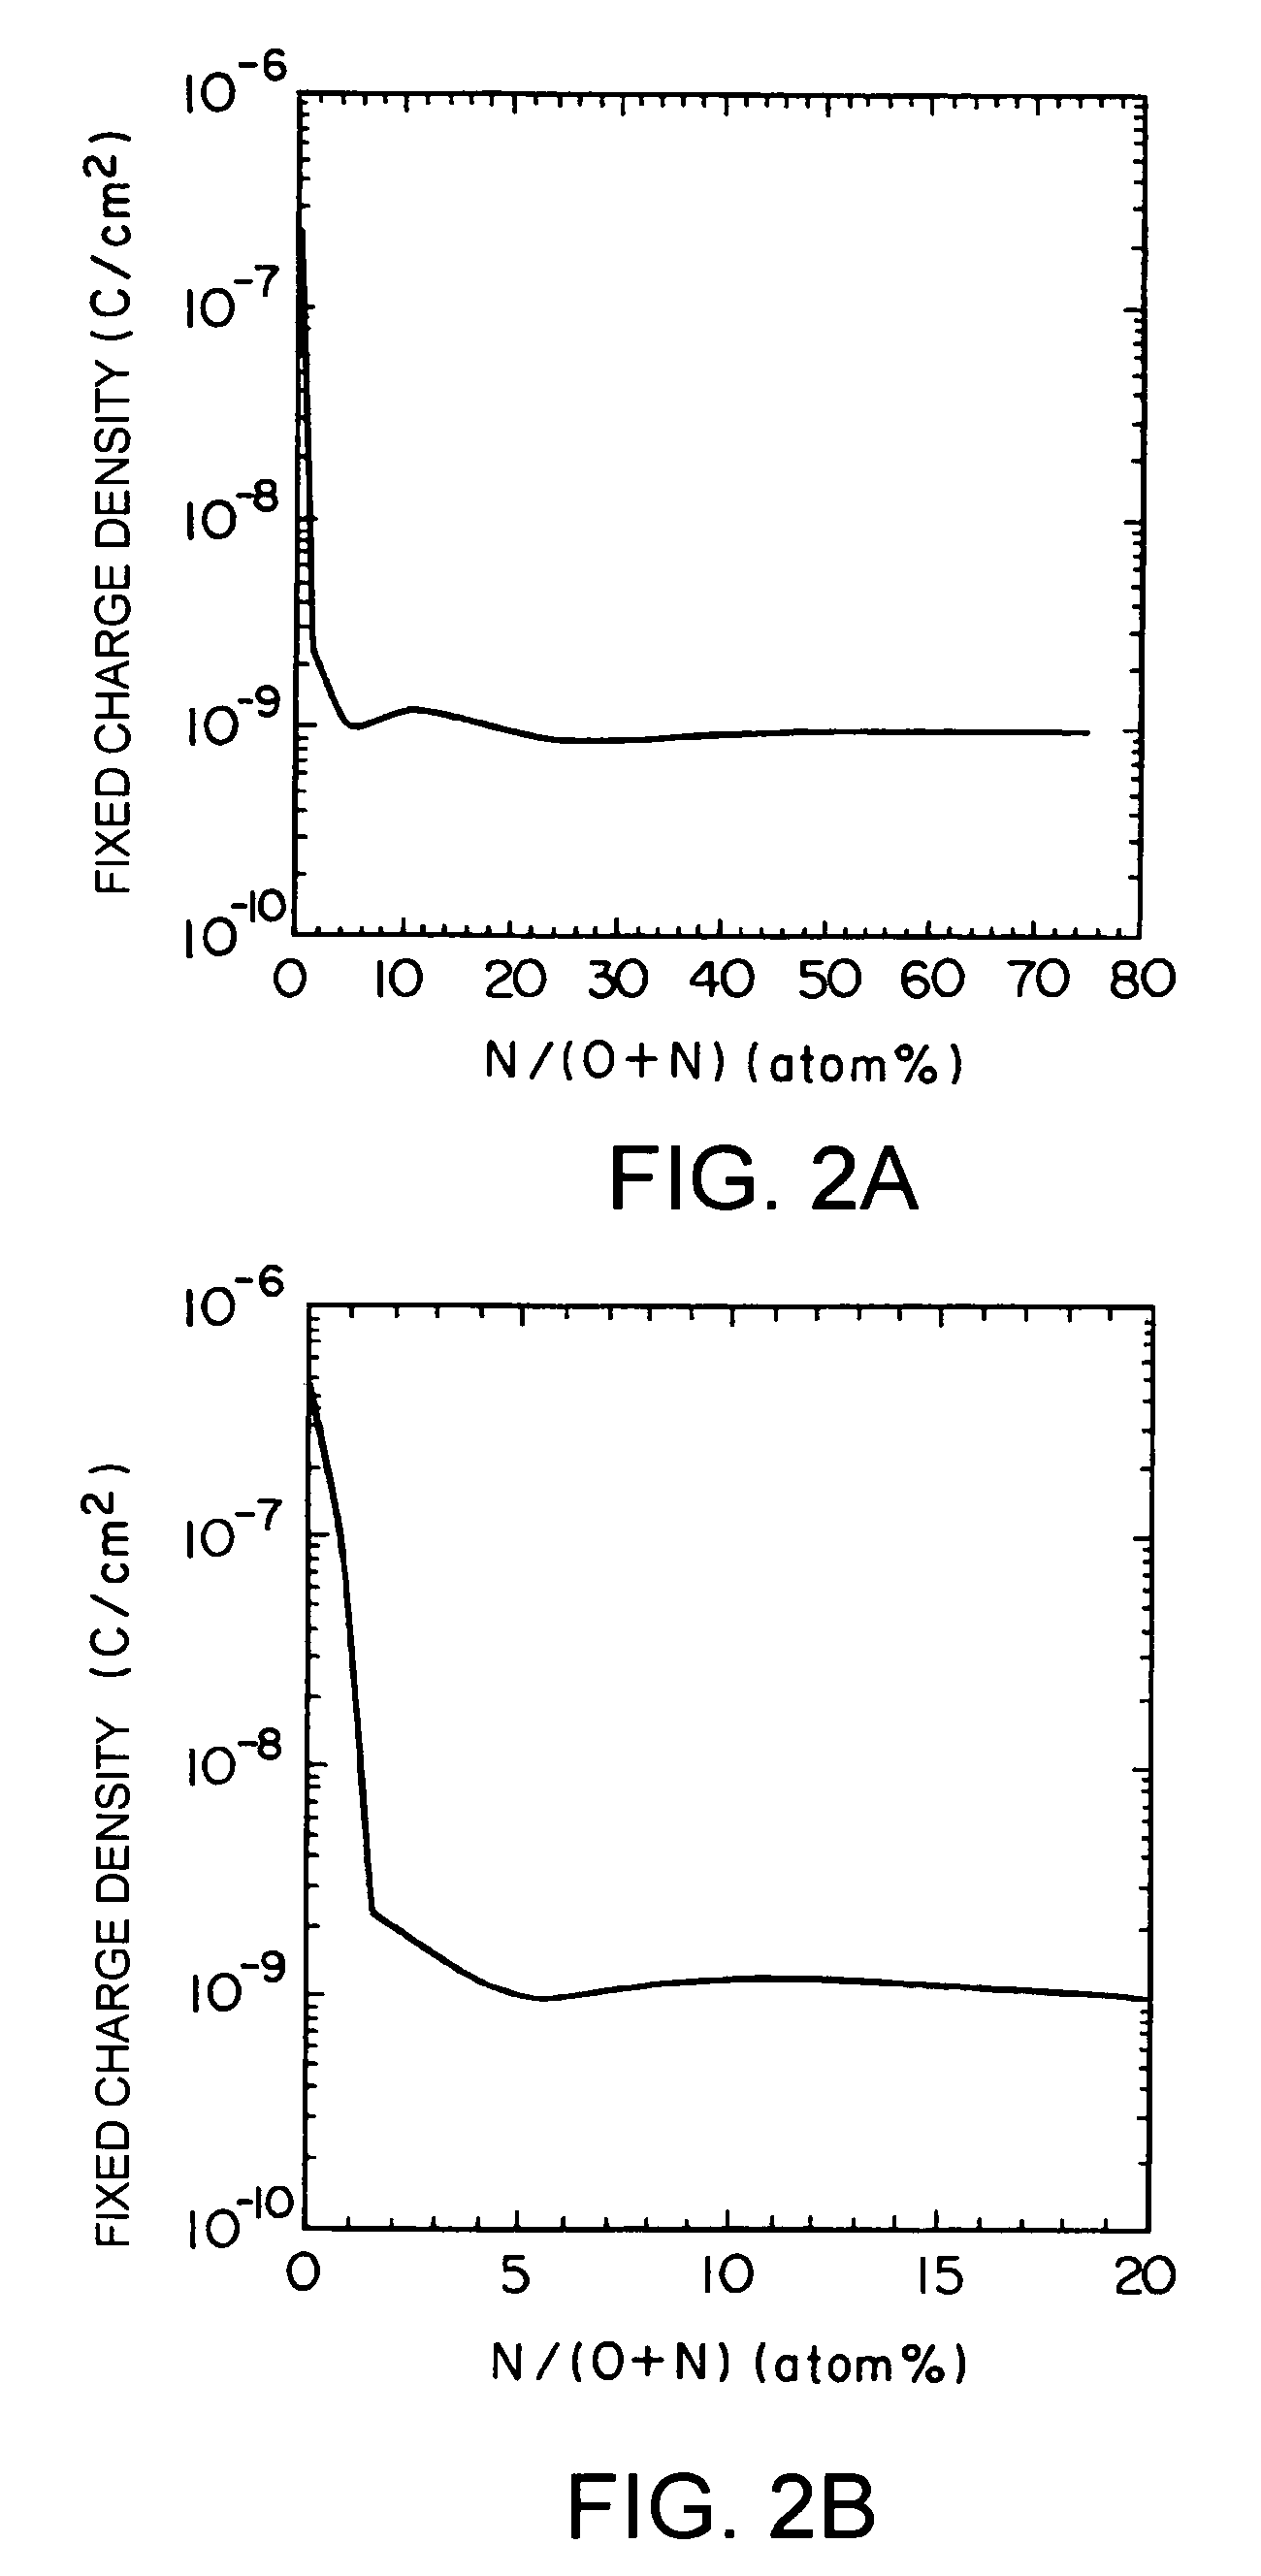 High dielectric constant MOSFET device